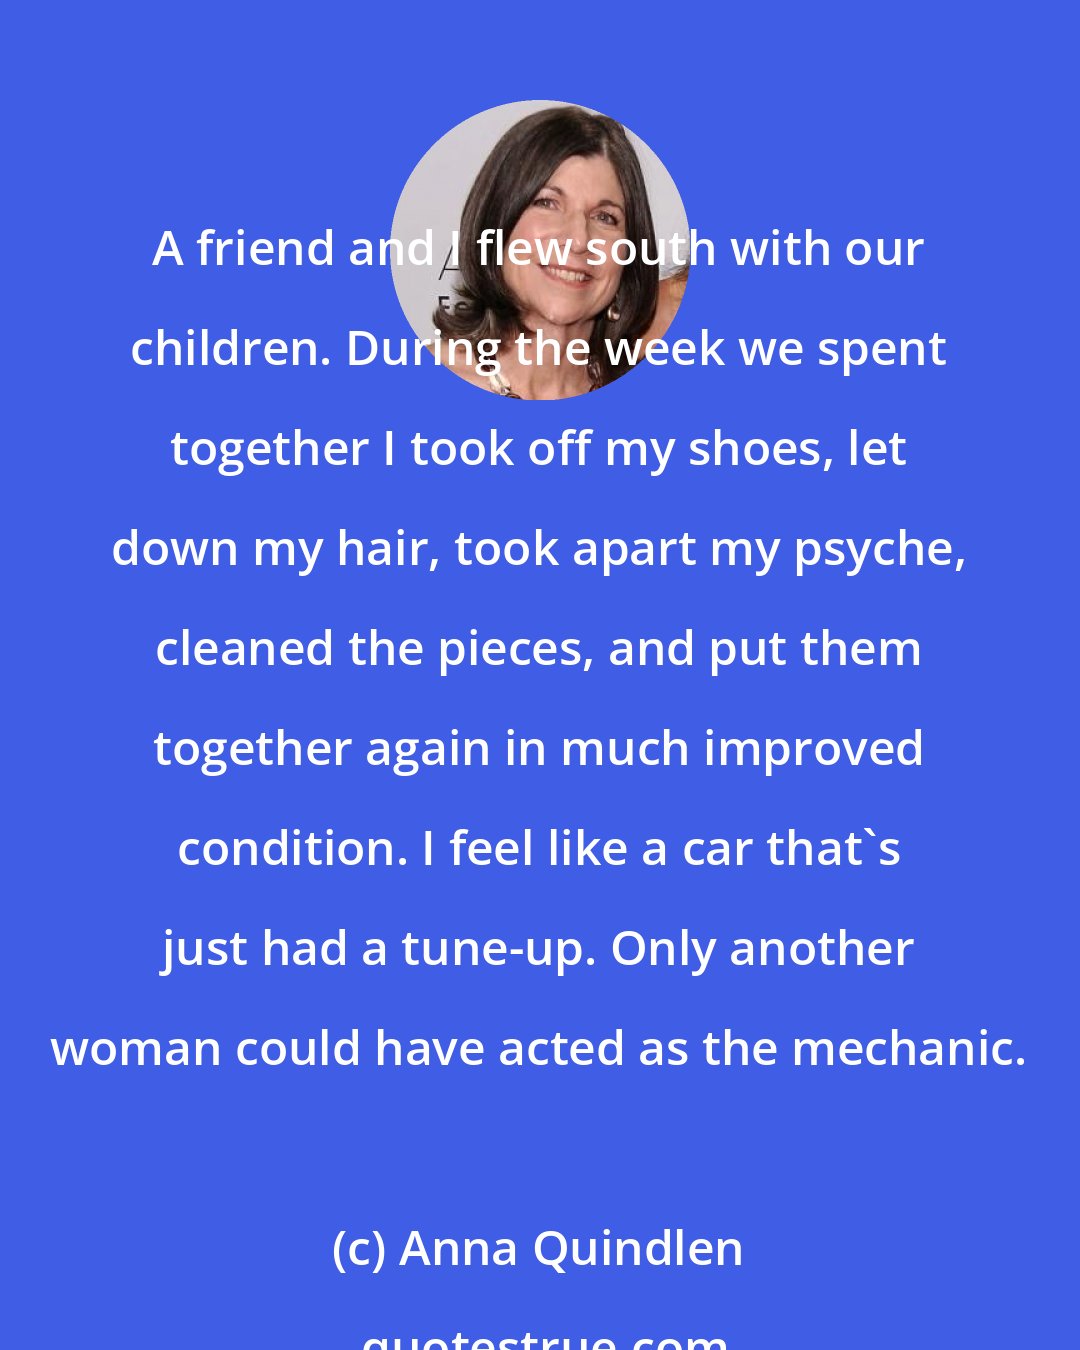 Anna Quindlen: A friend and I flew south with our children. During the week we spent together I took off my shoes, let down my hair, took apart my psyche, cleaned the pieces, and put them together again in much improved condition. I feel like a car that's just had a tune-up. Only another woman could have acted as the mechanic.